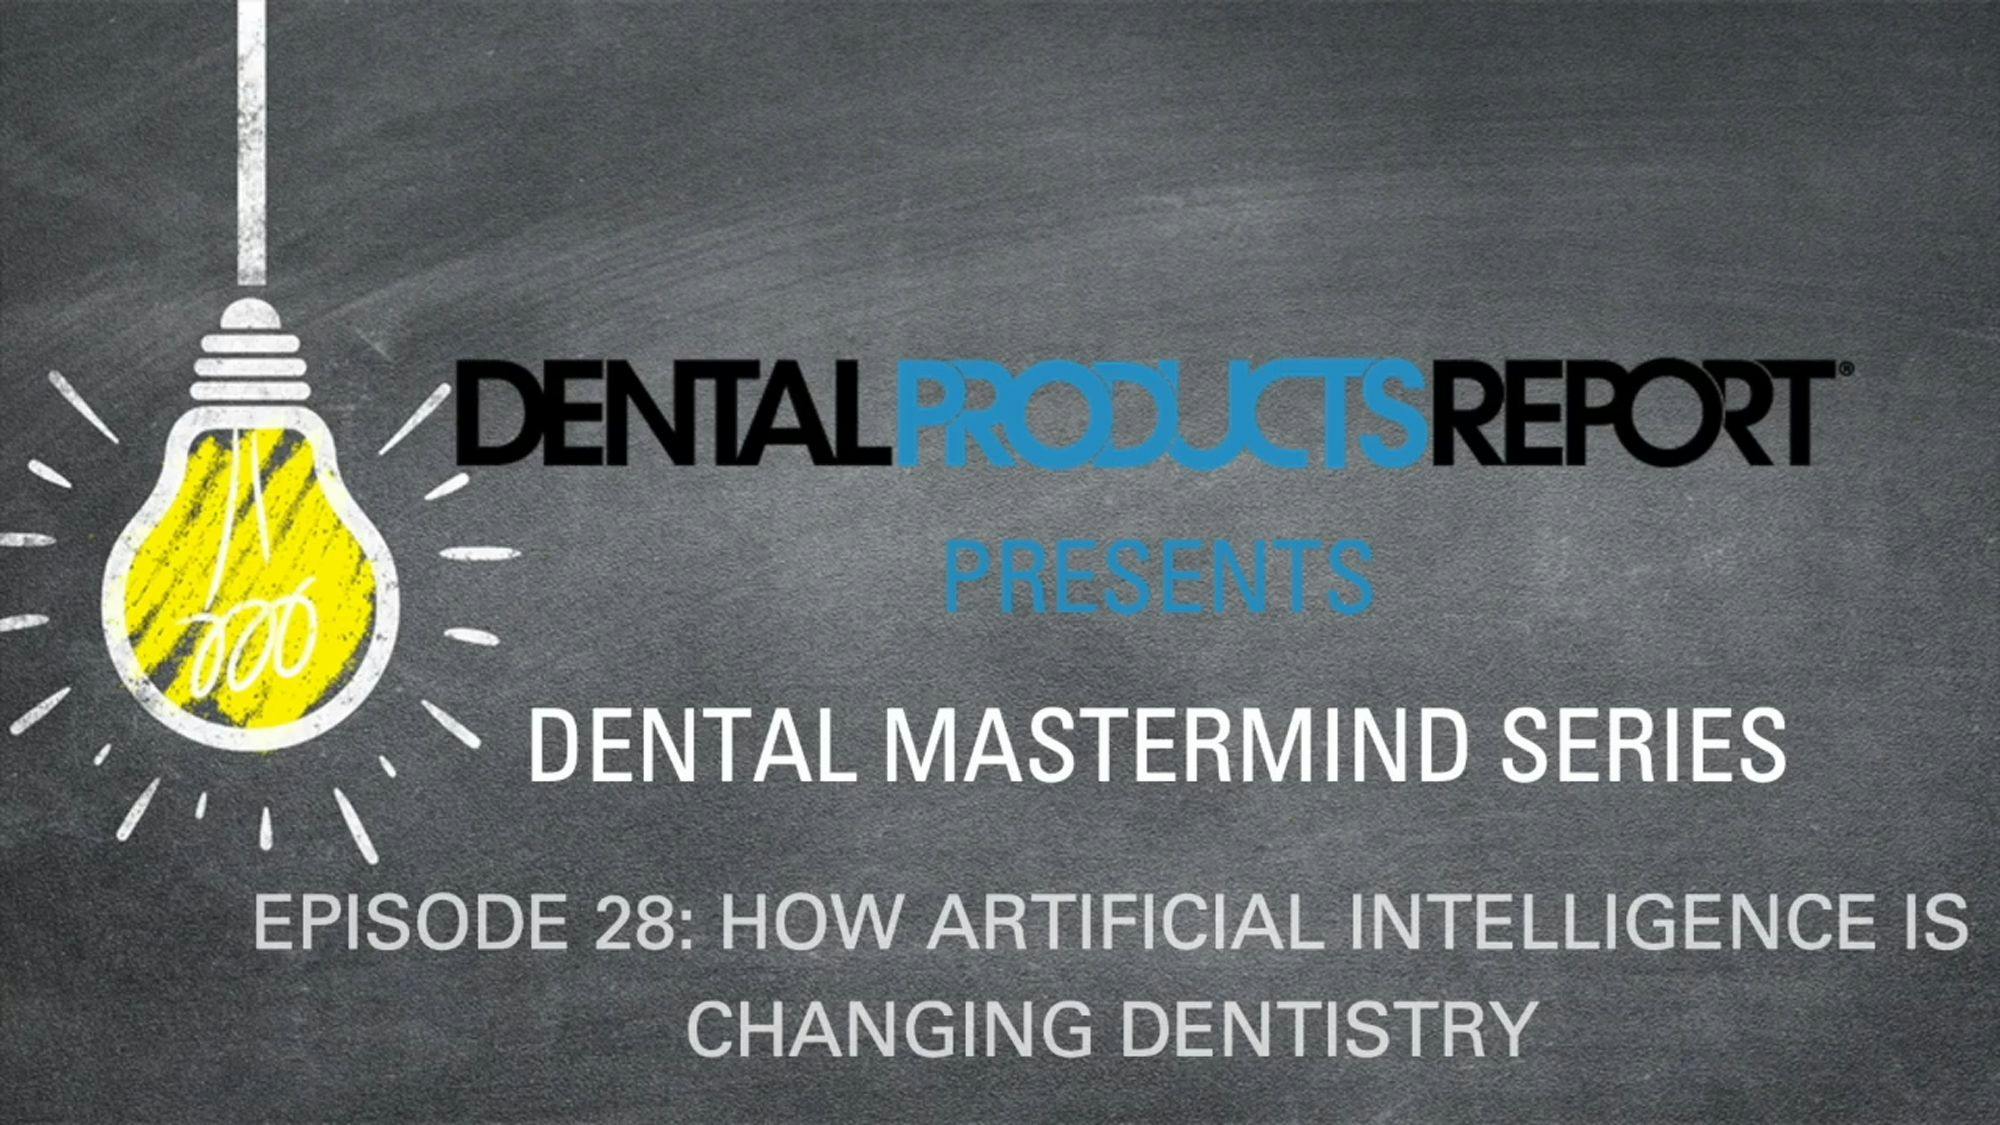 Mastermind - Episode 28 - How Artificial Intelligence is Changing Dentistry